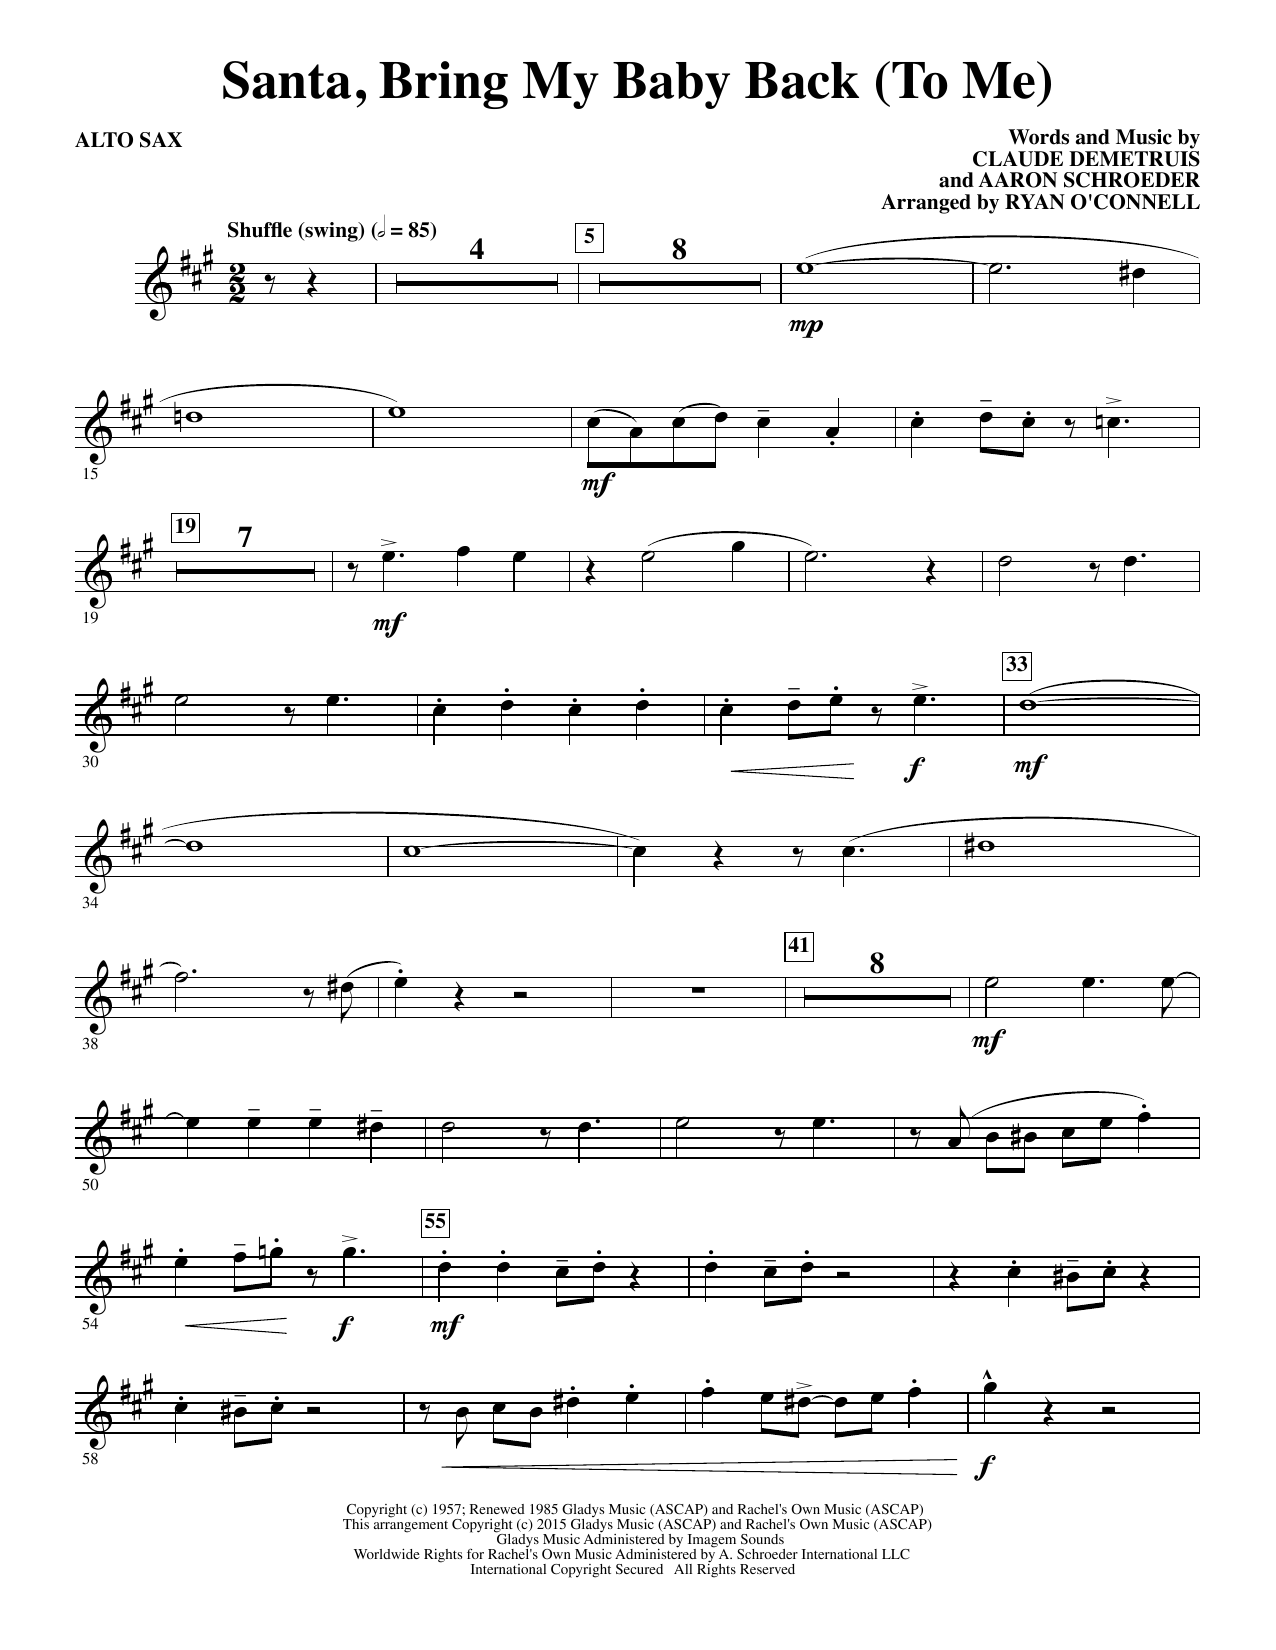 Ryan O'Connell Santa, Bring My Baby Back (To Me) - Alto Sax sheet music notes and chords. Download Printable PDF.